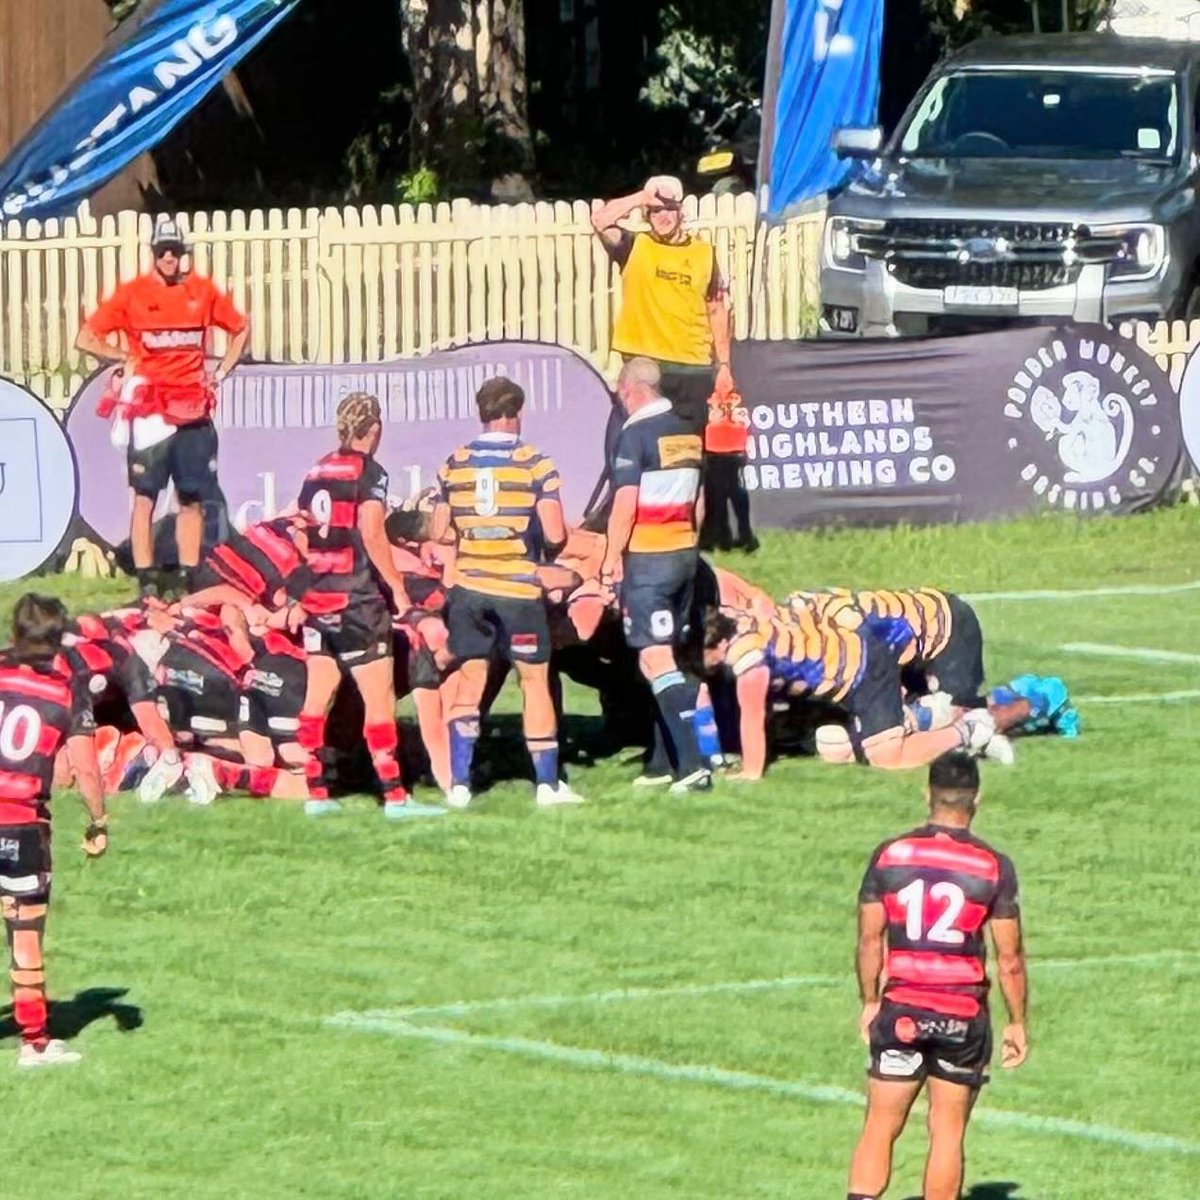 Nice to see Powder Monkey and Southern Highlands Brewing supporting the thirsty supporters at the Sydney University rugby! #pmbrewco